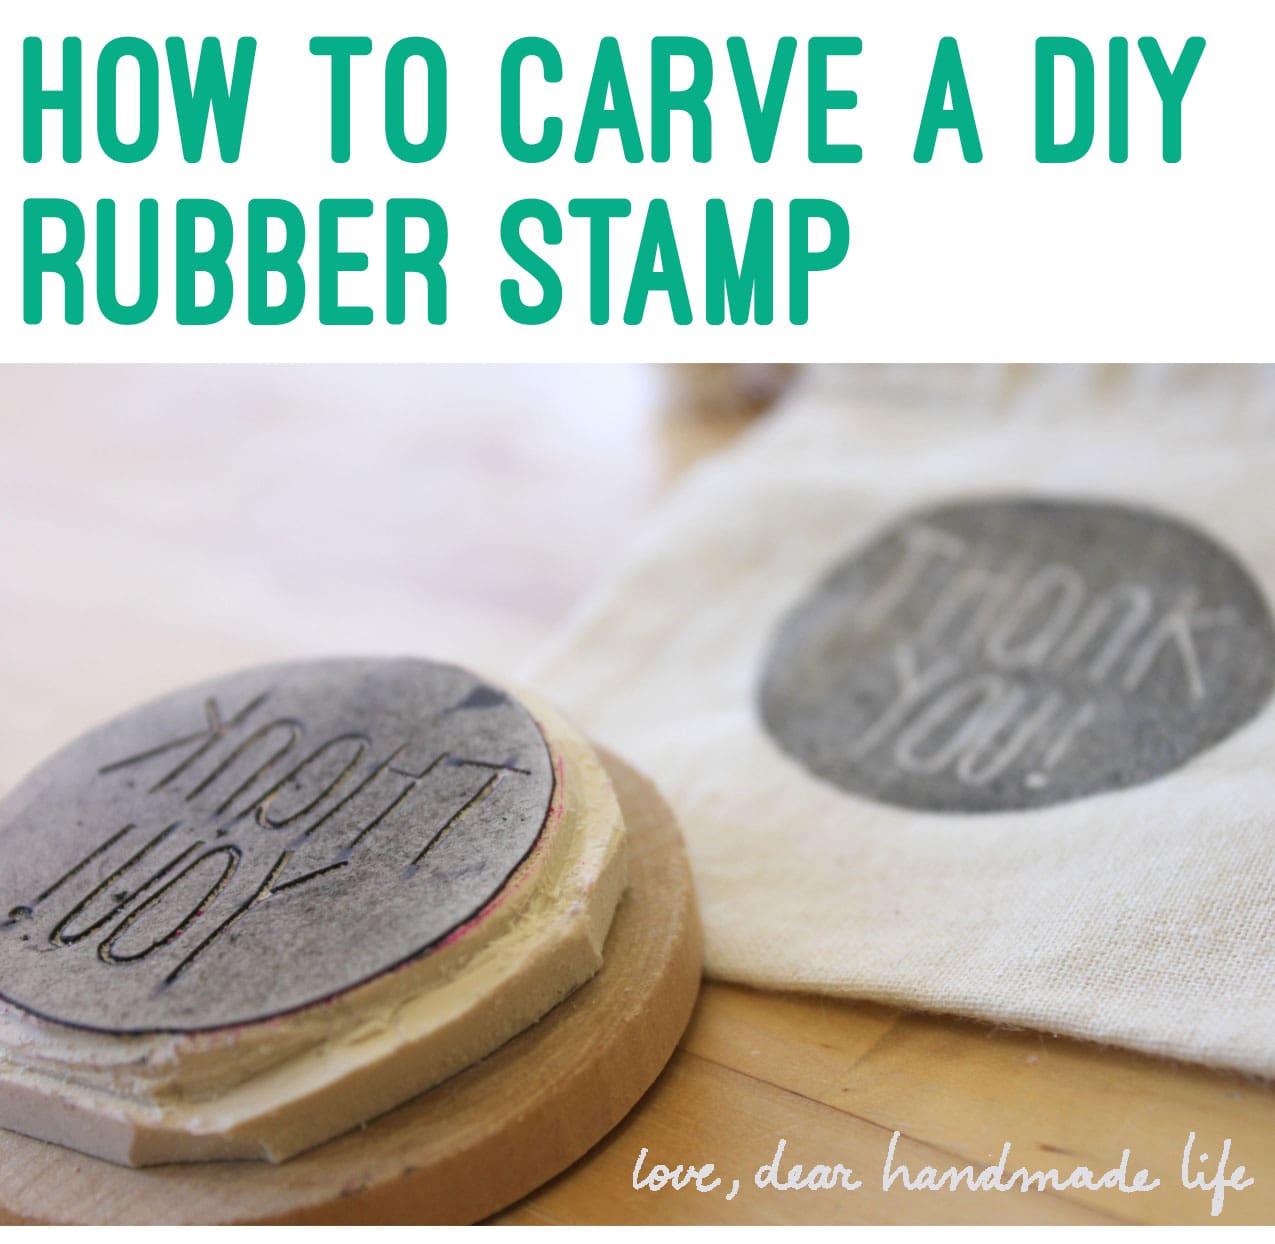 How To Make a DIY Carved Rubber Stamp - Dear Handmade Life